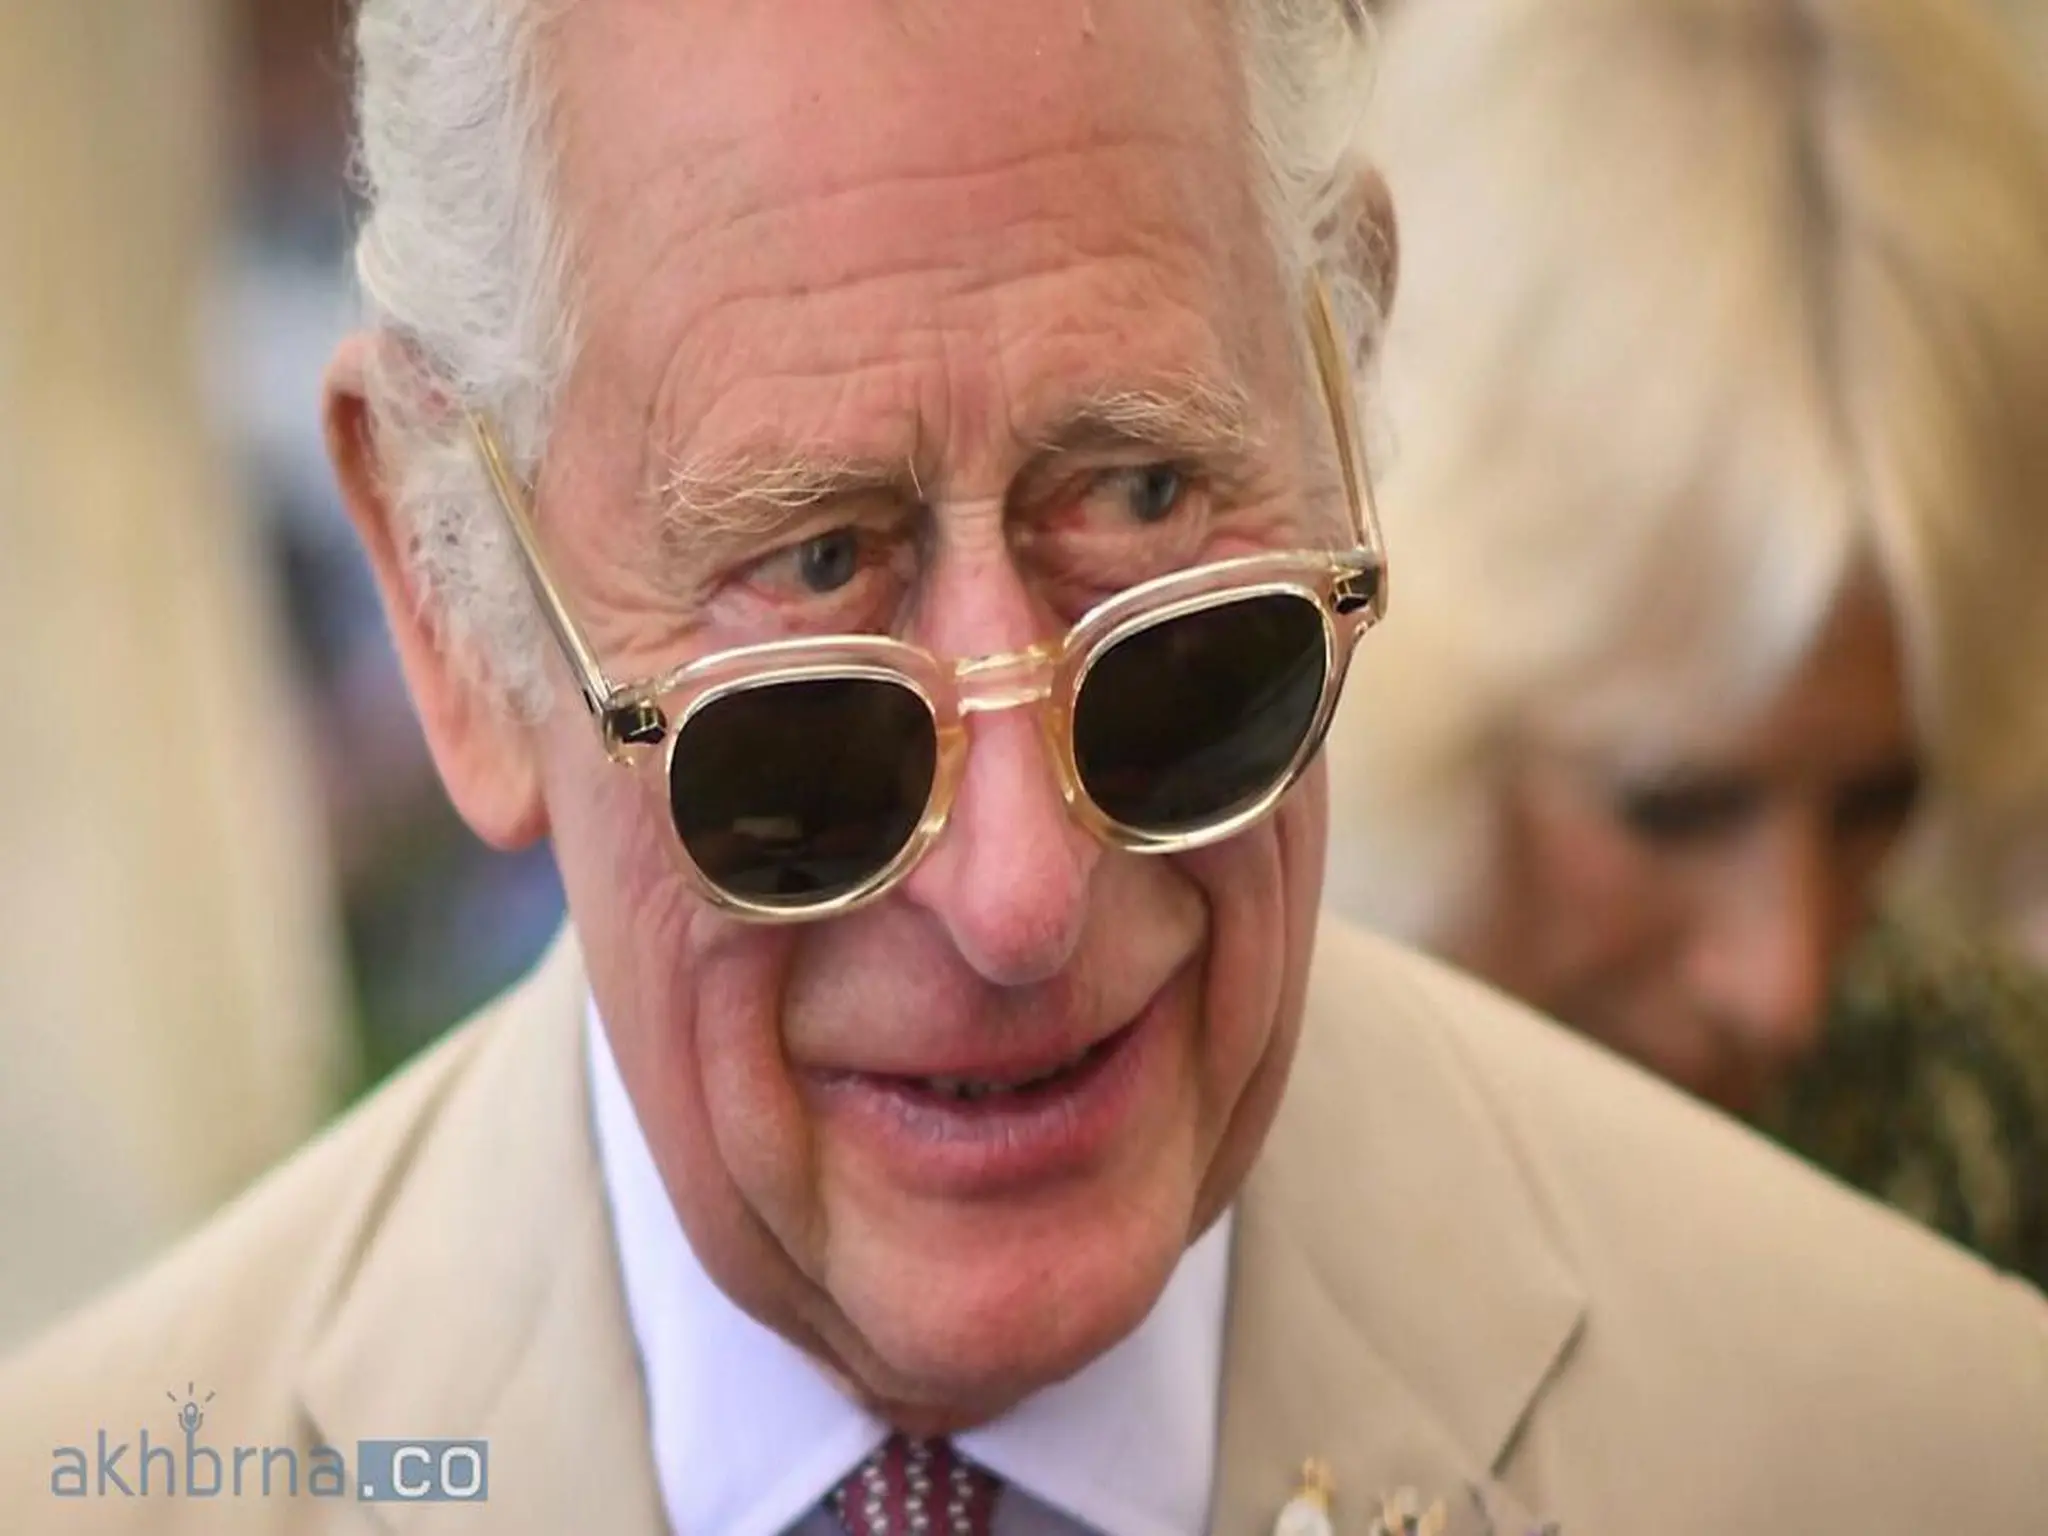 Britain: King Charles diagnosed with cancer, postpones his public duties